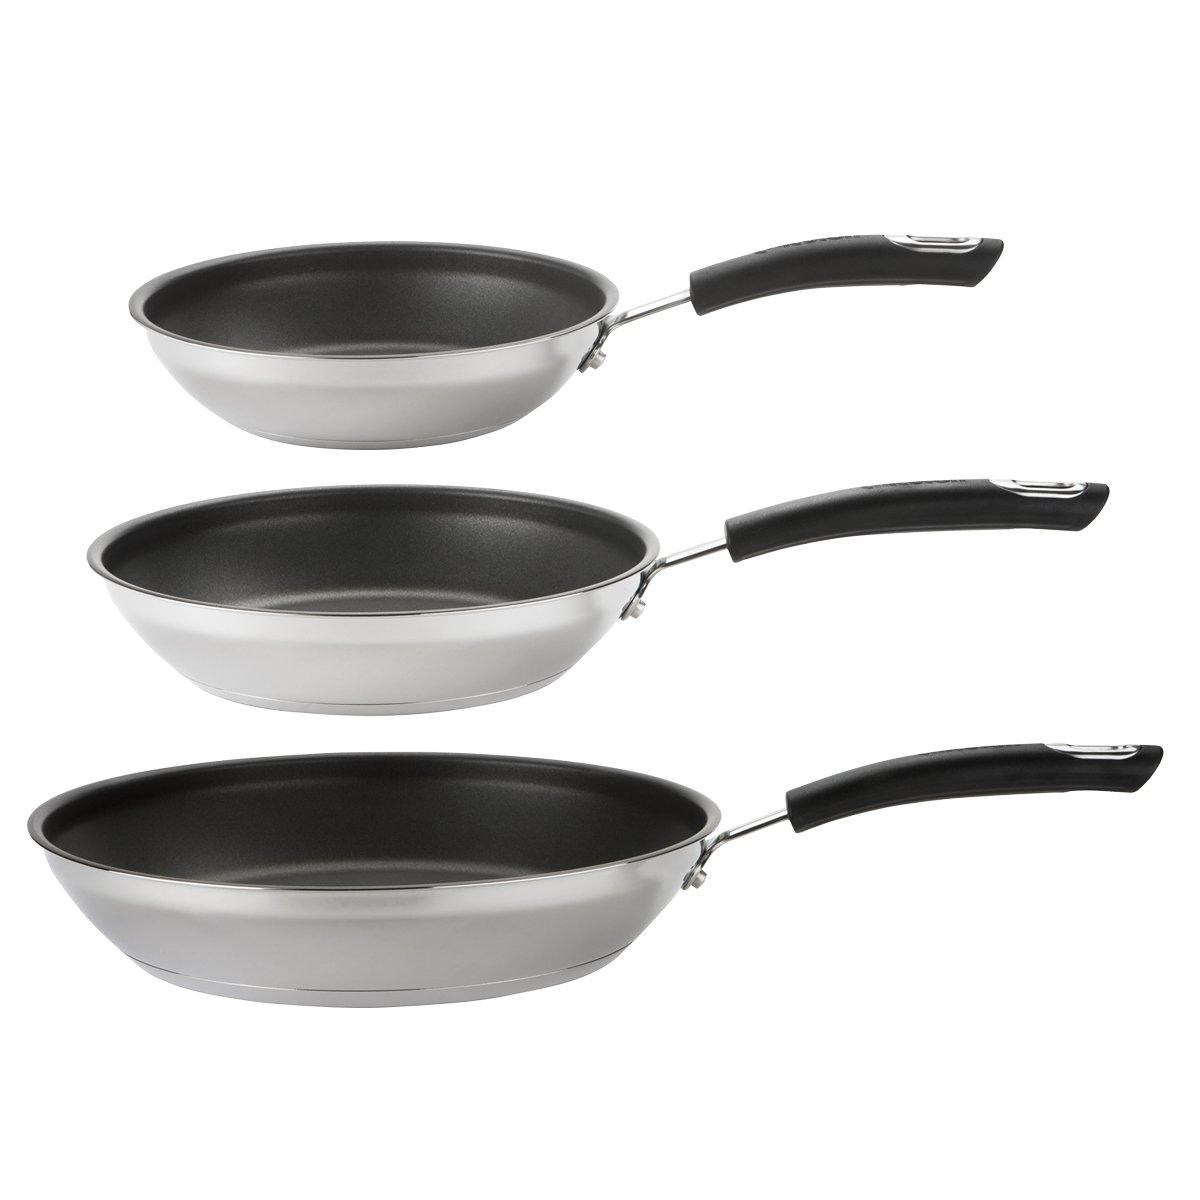 Total Frying Pan Set Induction Cookware Non Stick Pans - Pack of 3